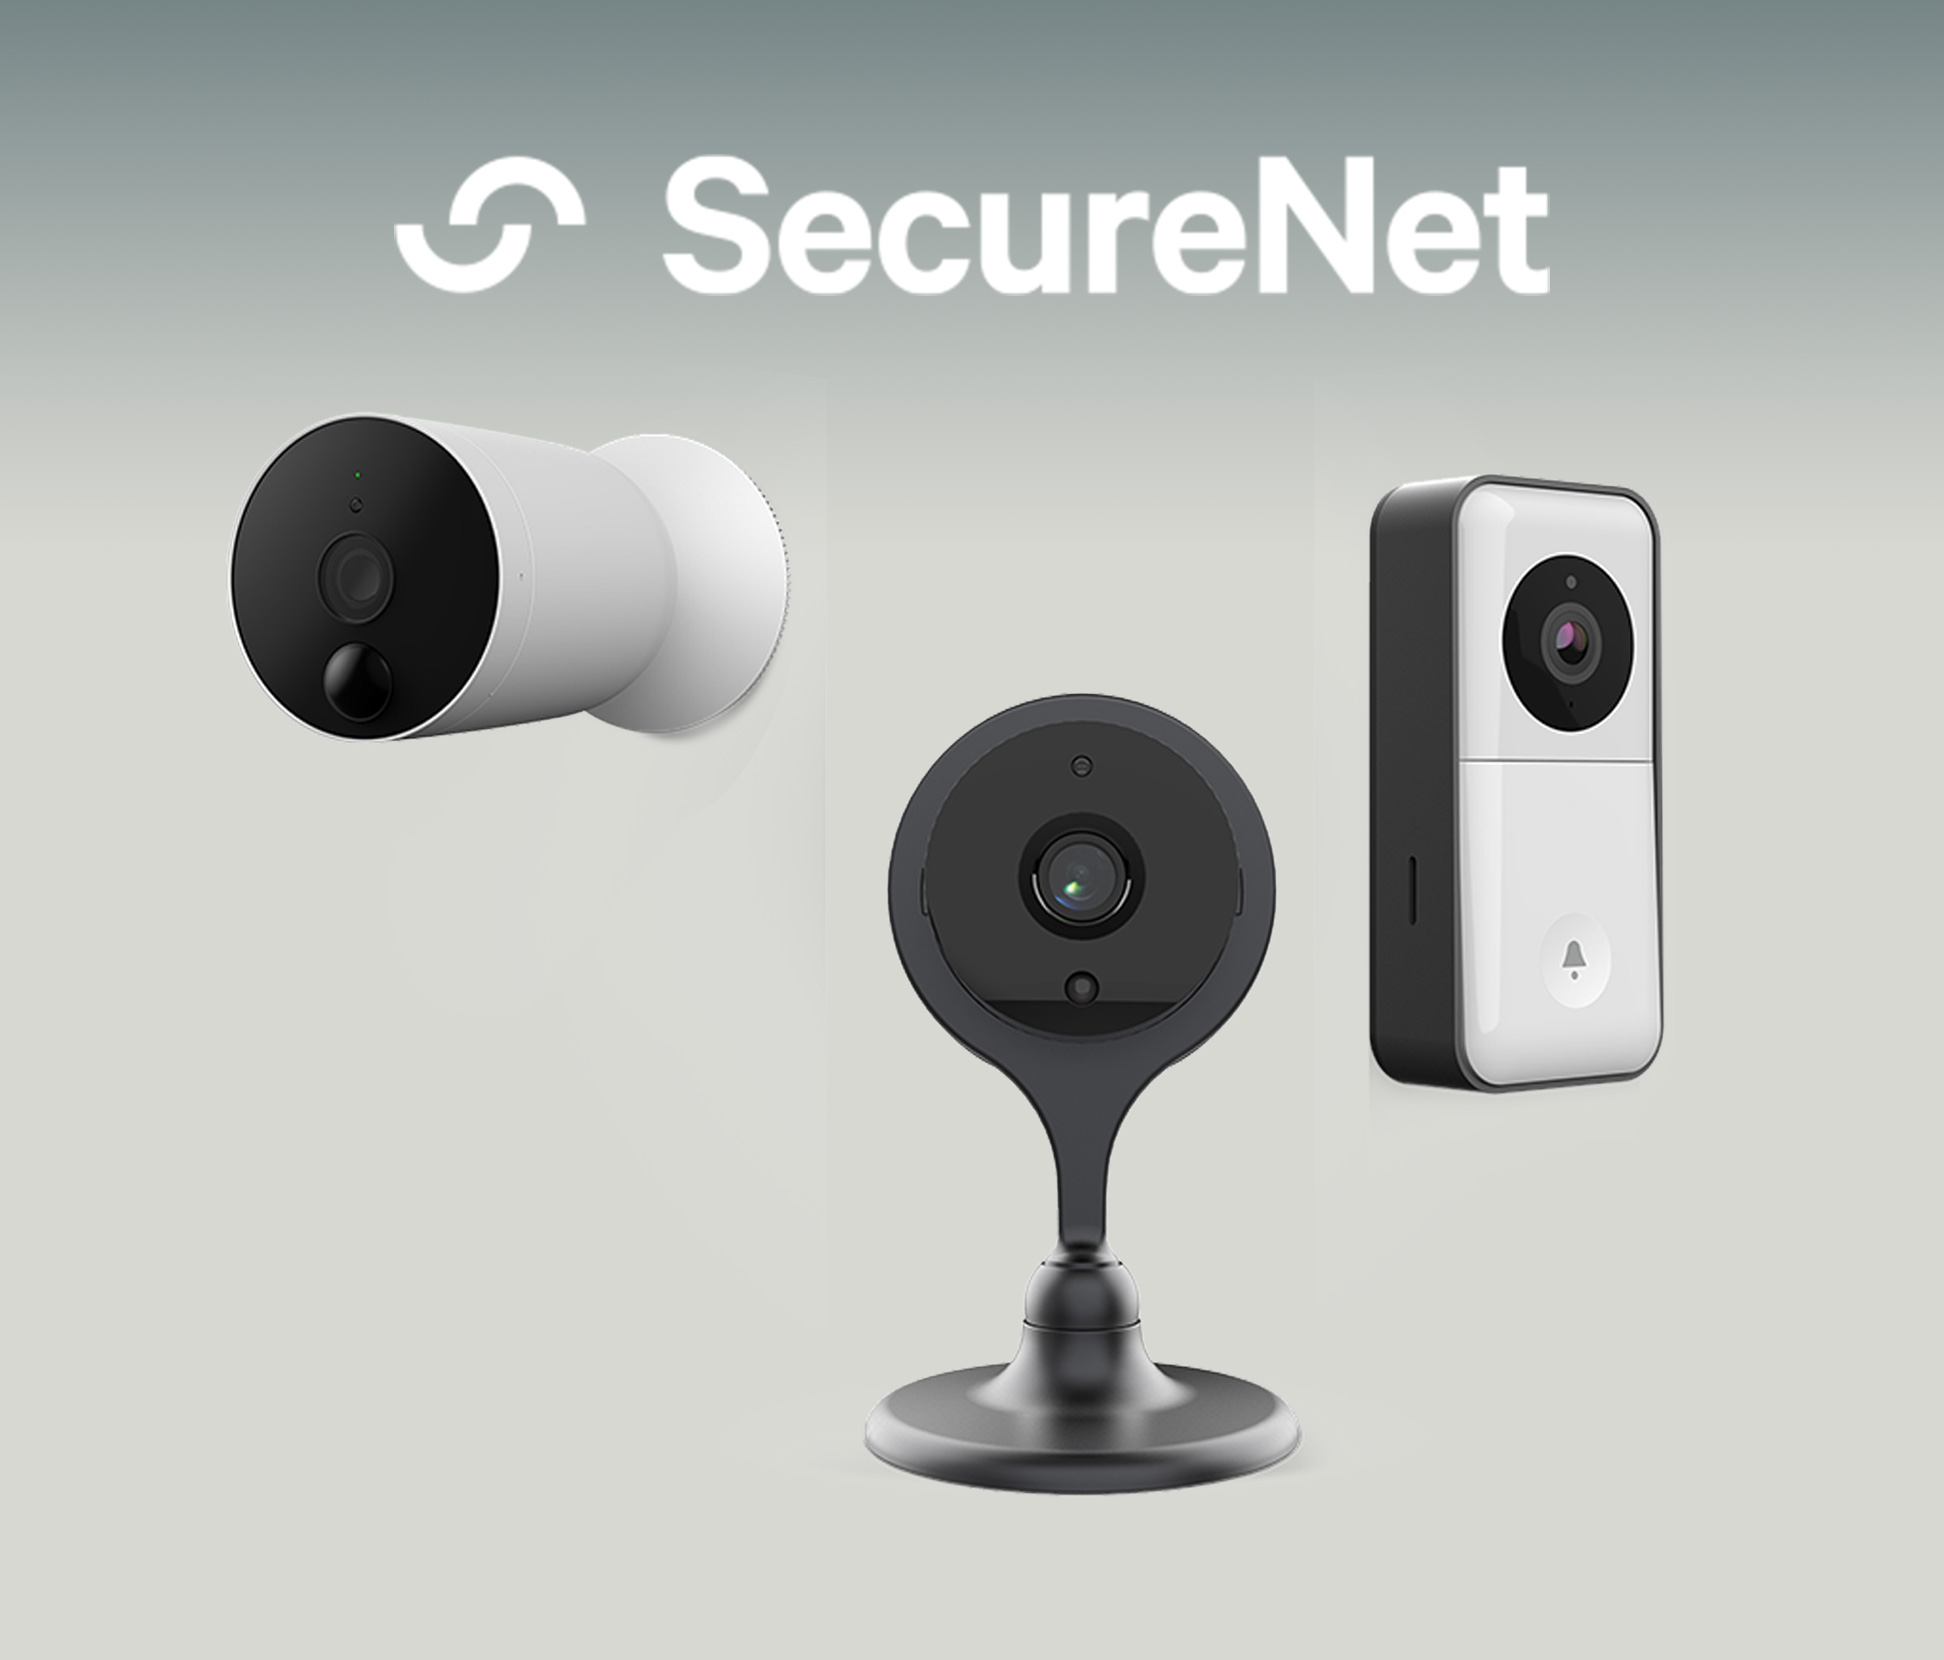 An image of a webcam that says SecureNet